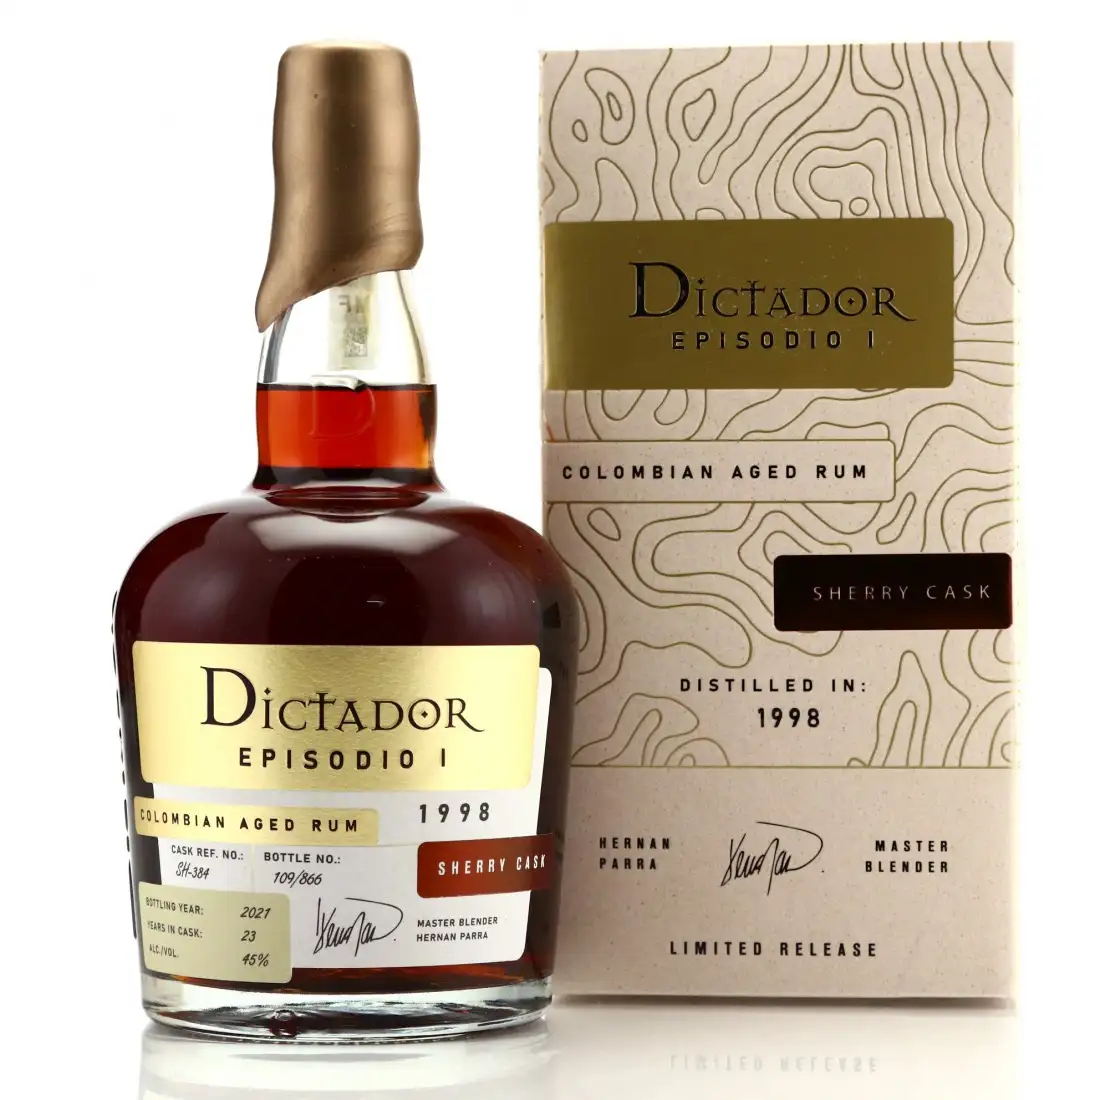 Image of the front of the bottle of the rum Dictador Episodio 1 Sherry Cask